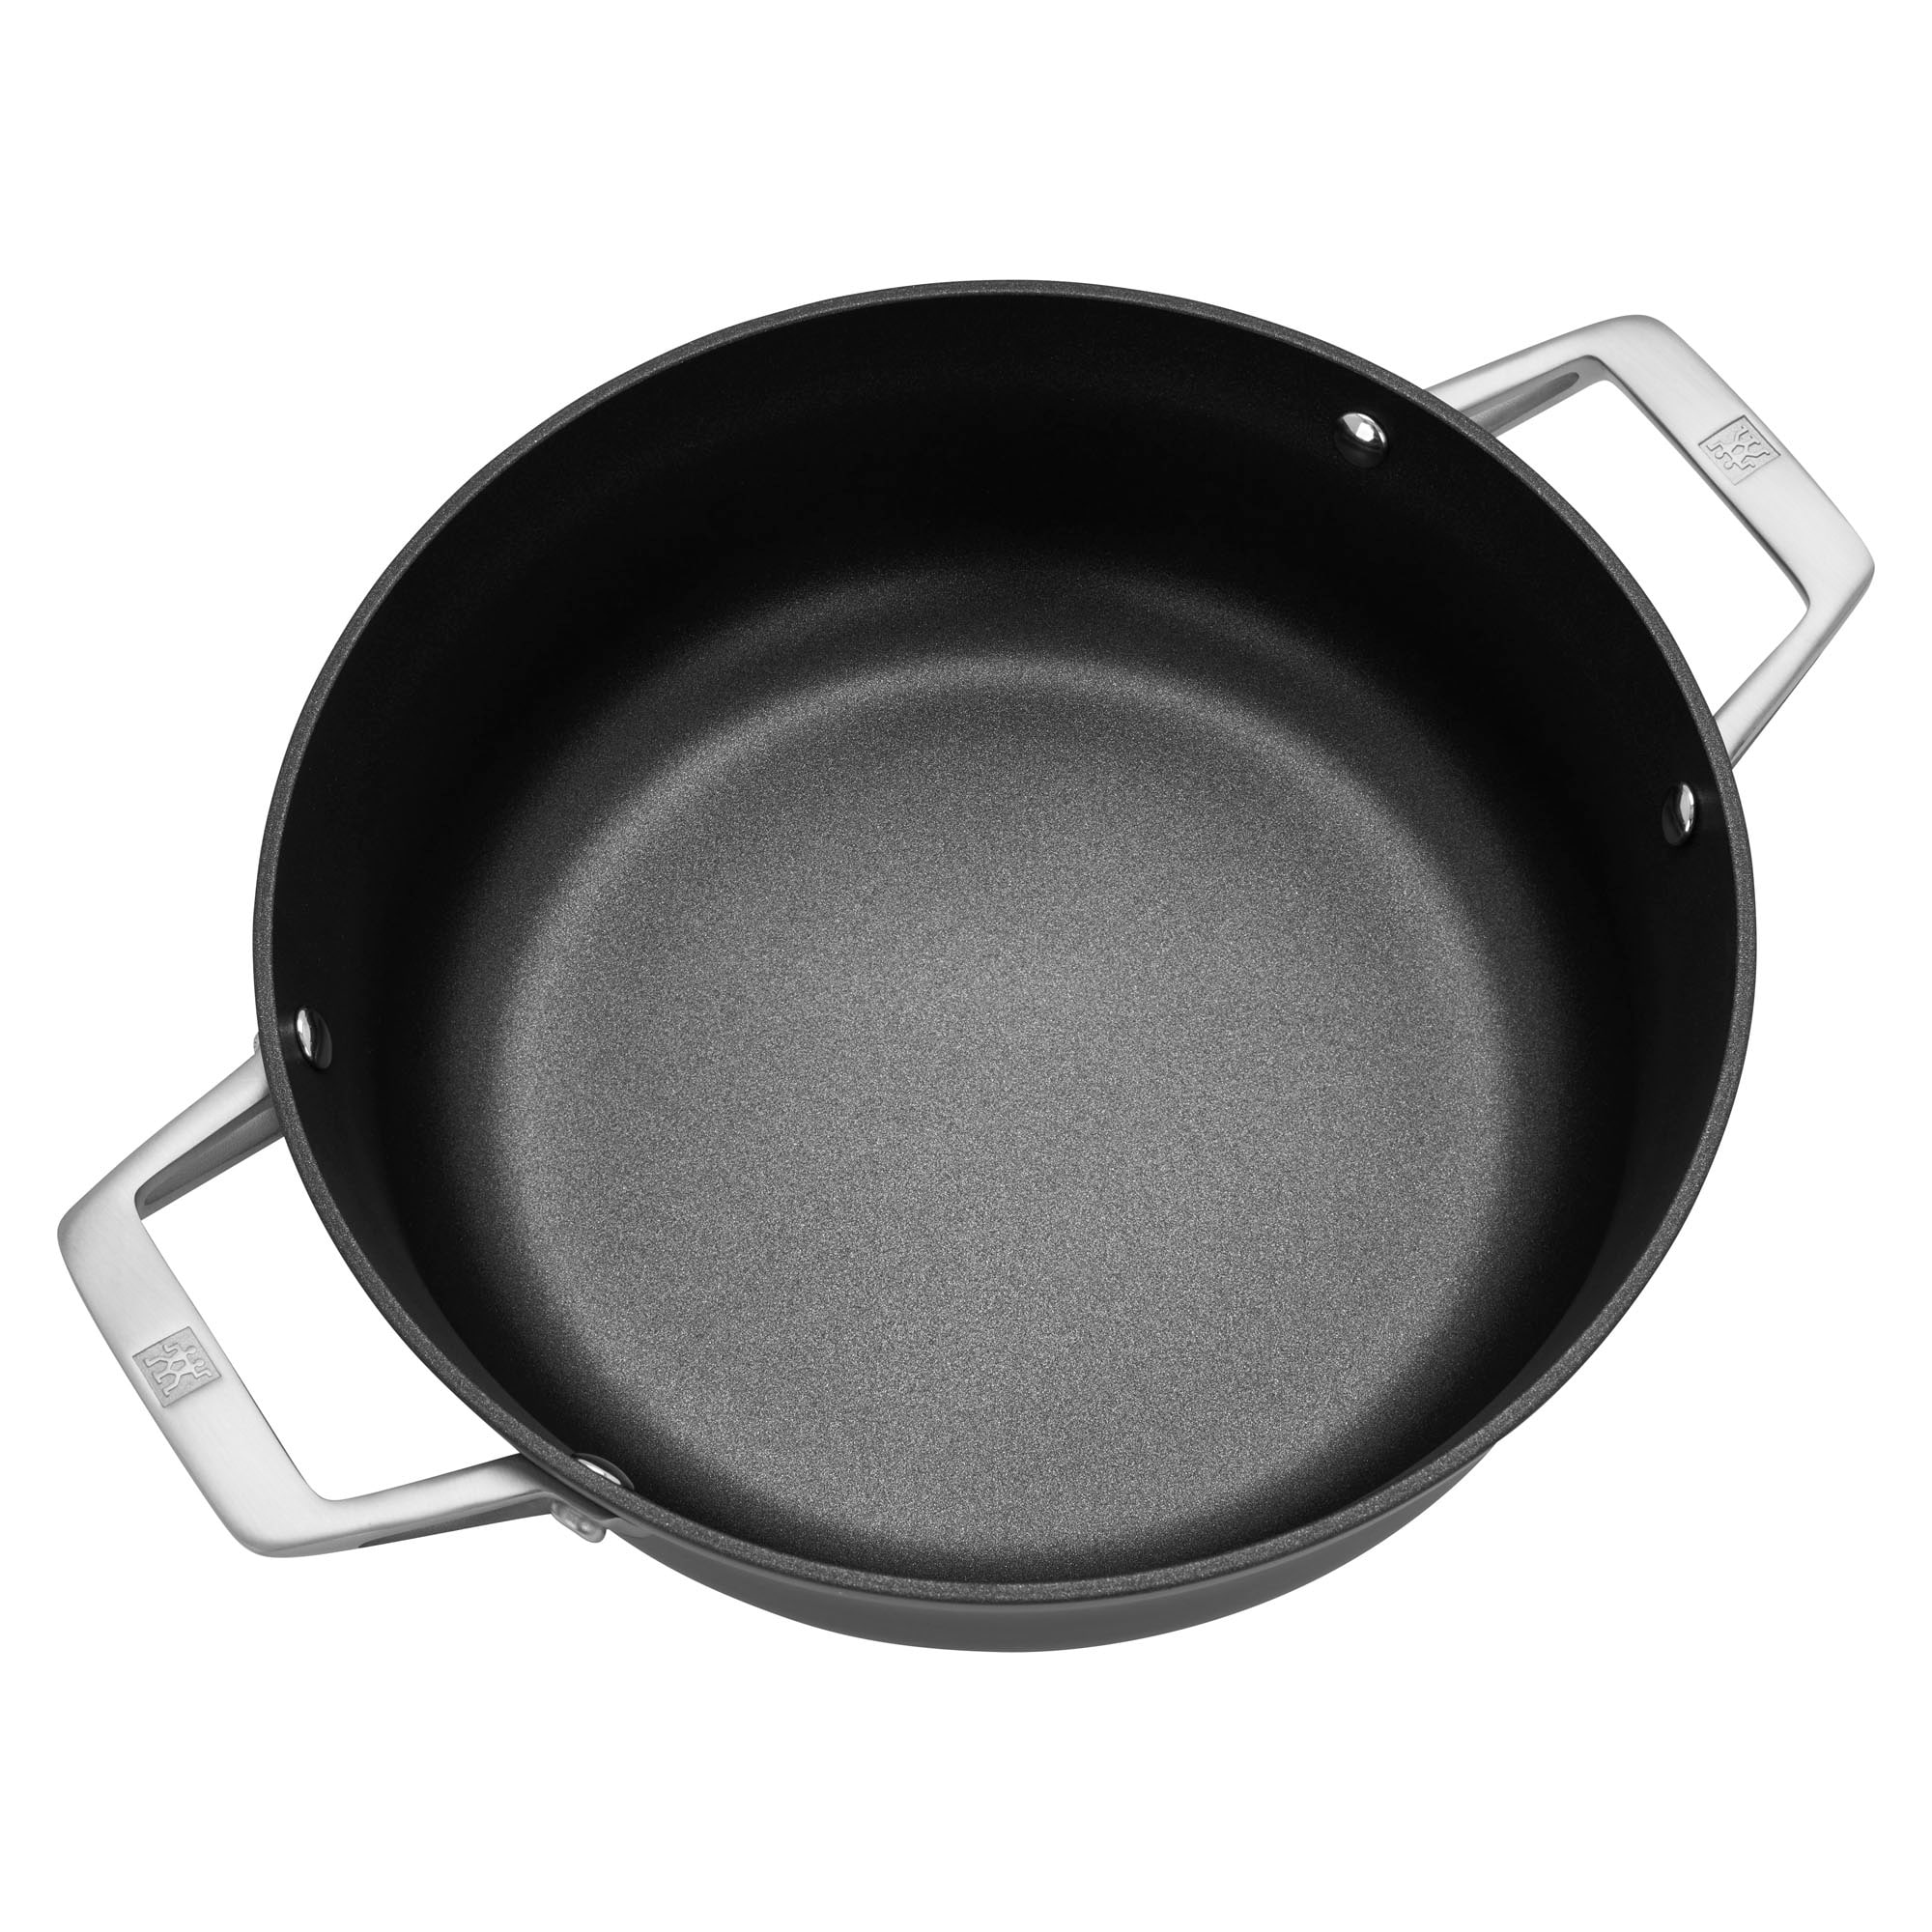 https://ak1.ostkcdn.com/images/products/is/images/direct/27cf31ac623cd3752c793abefa440cc793ae58c2/ZWILLING-Motion-Hard-Anodized-4-qt-Aluminum-Nonstick-Chef%27s-Pan.jpg